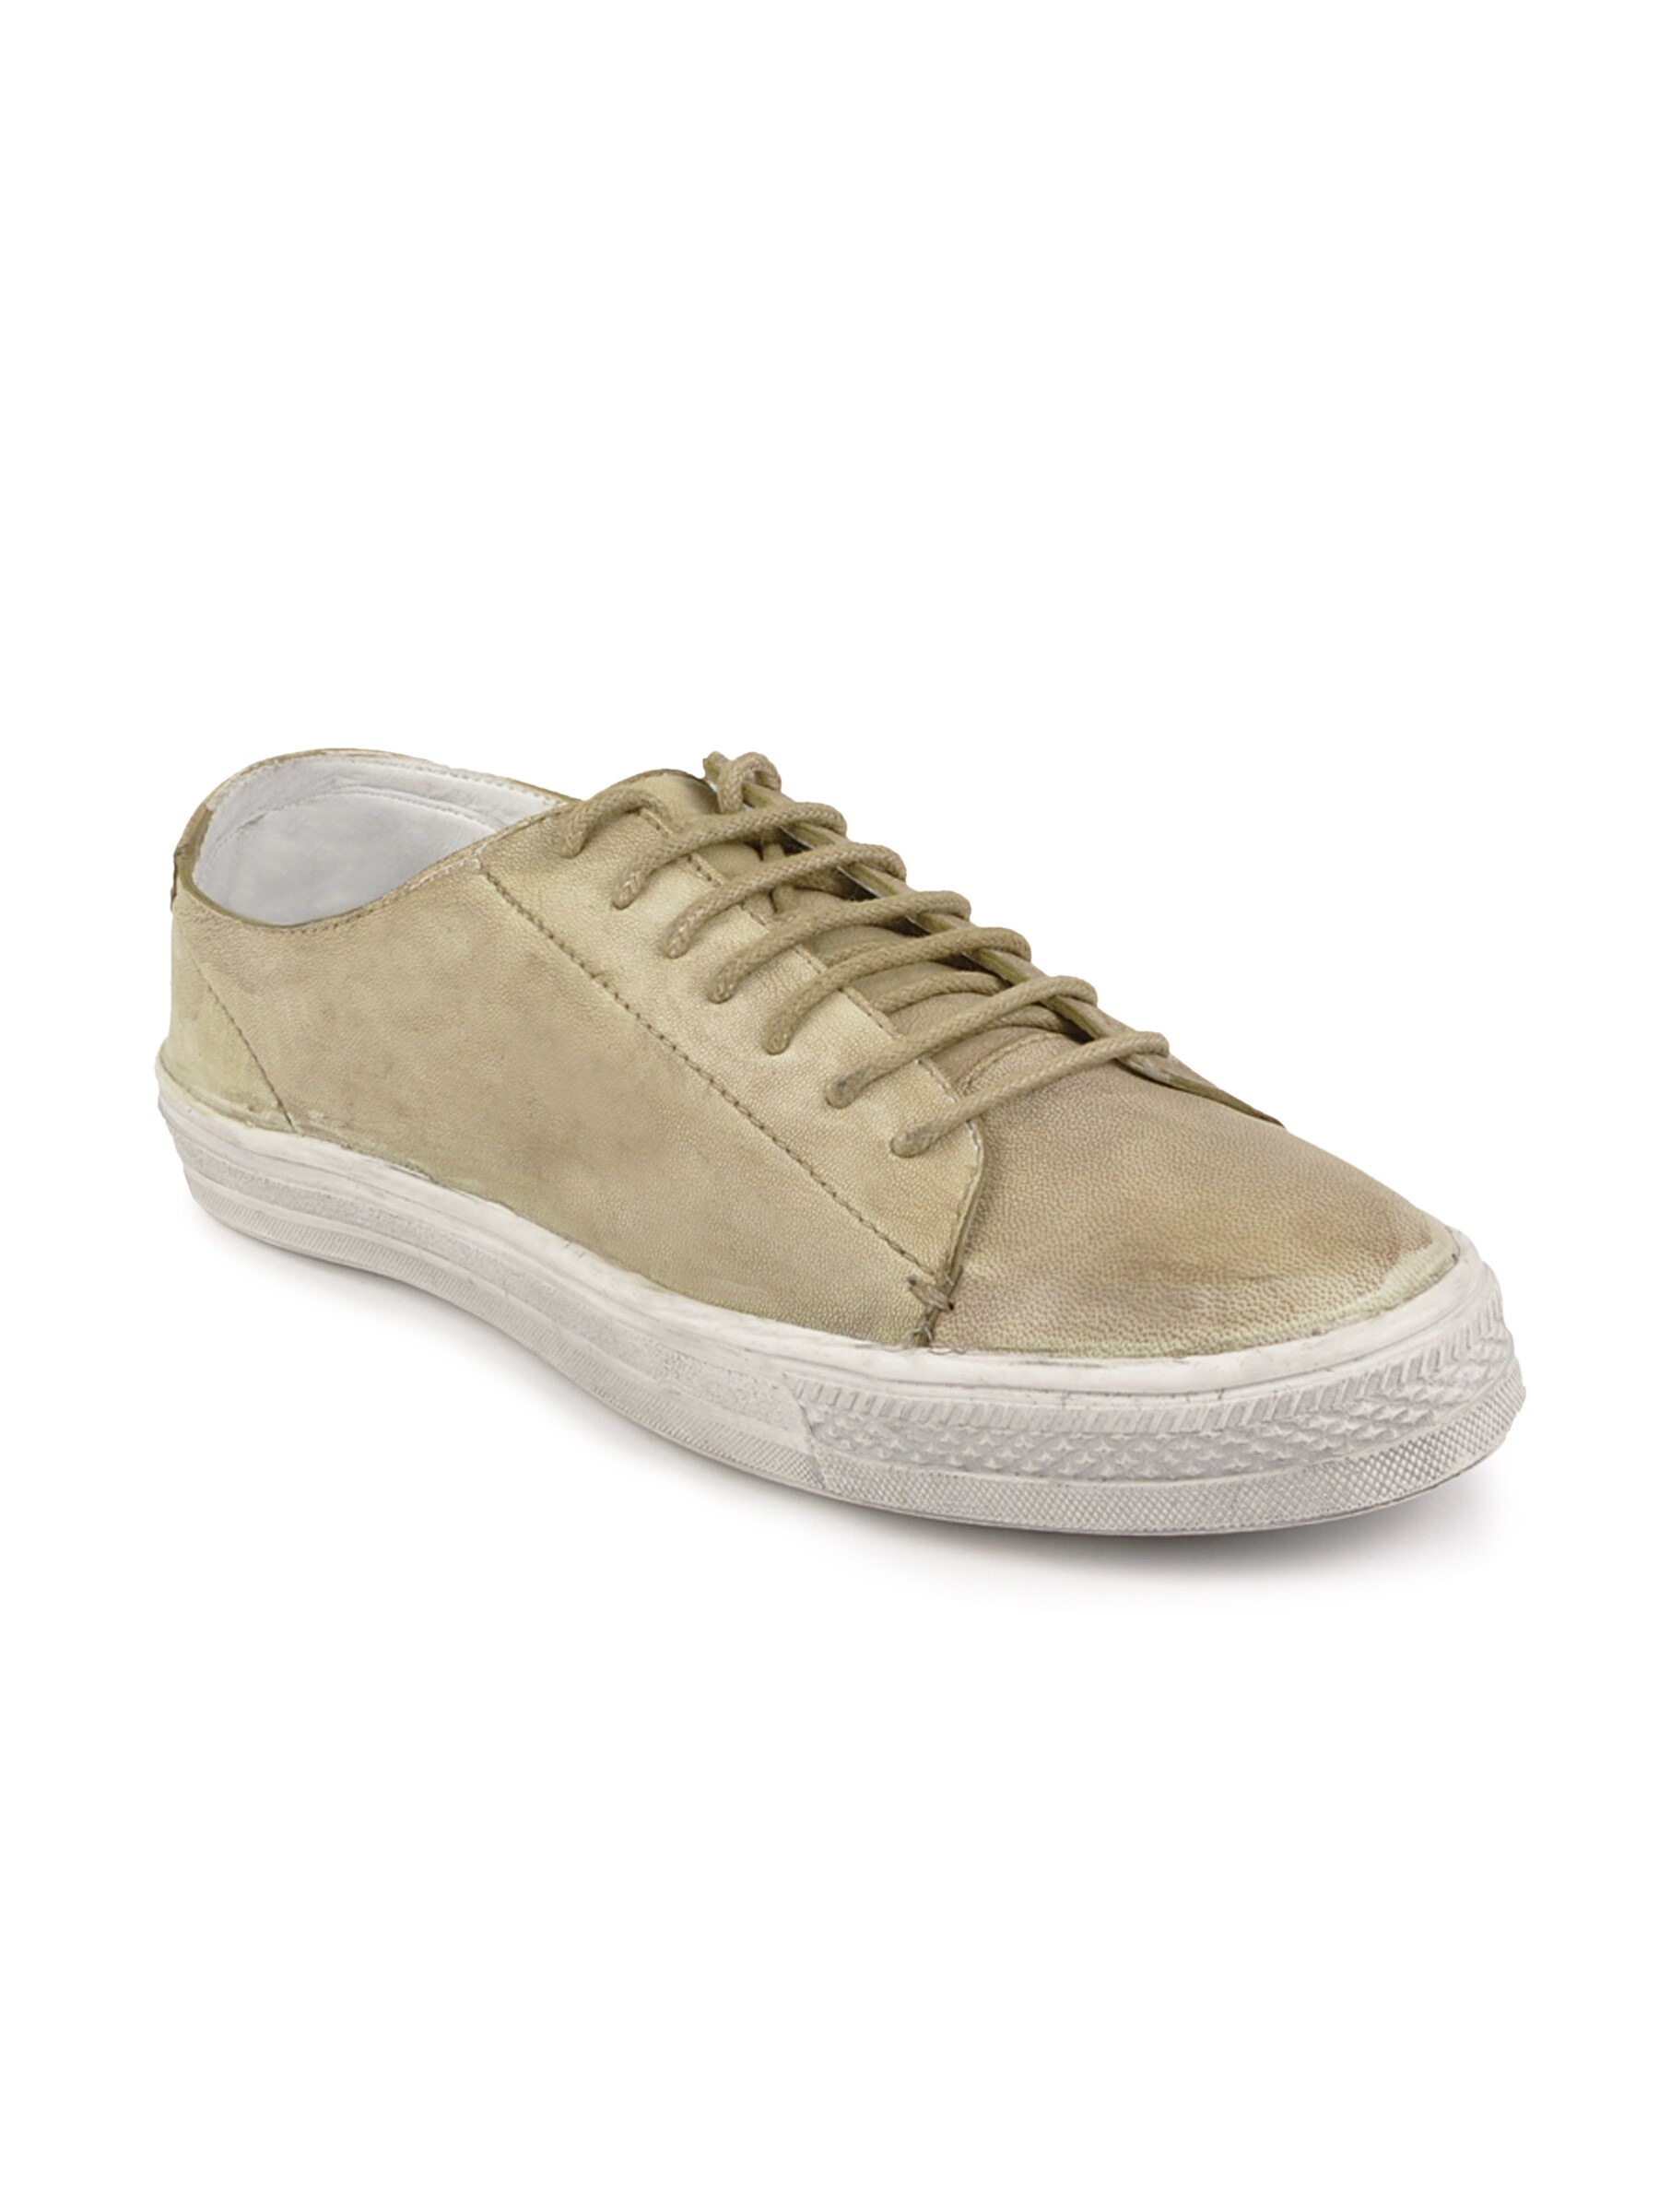 Playboy Men Casual Beige Casual Shoes